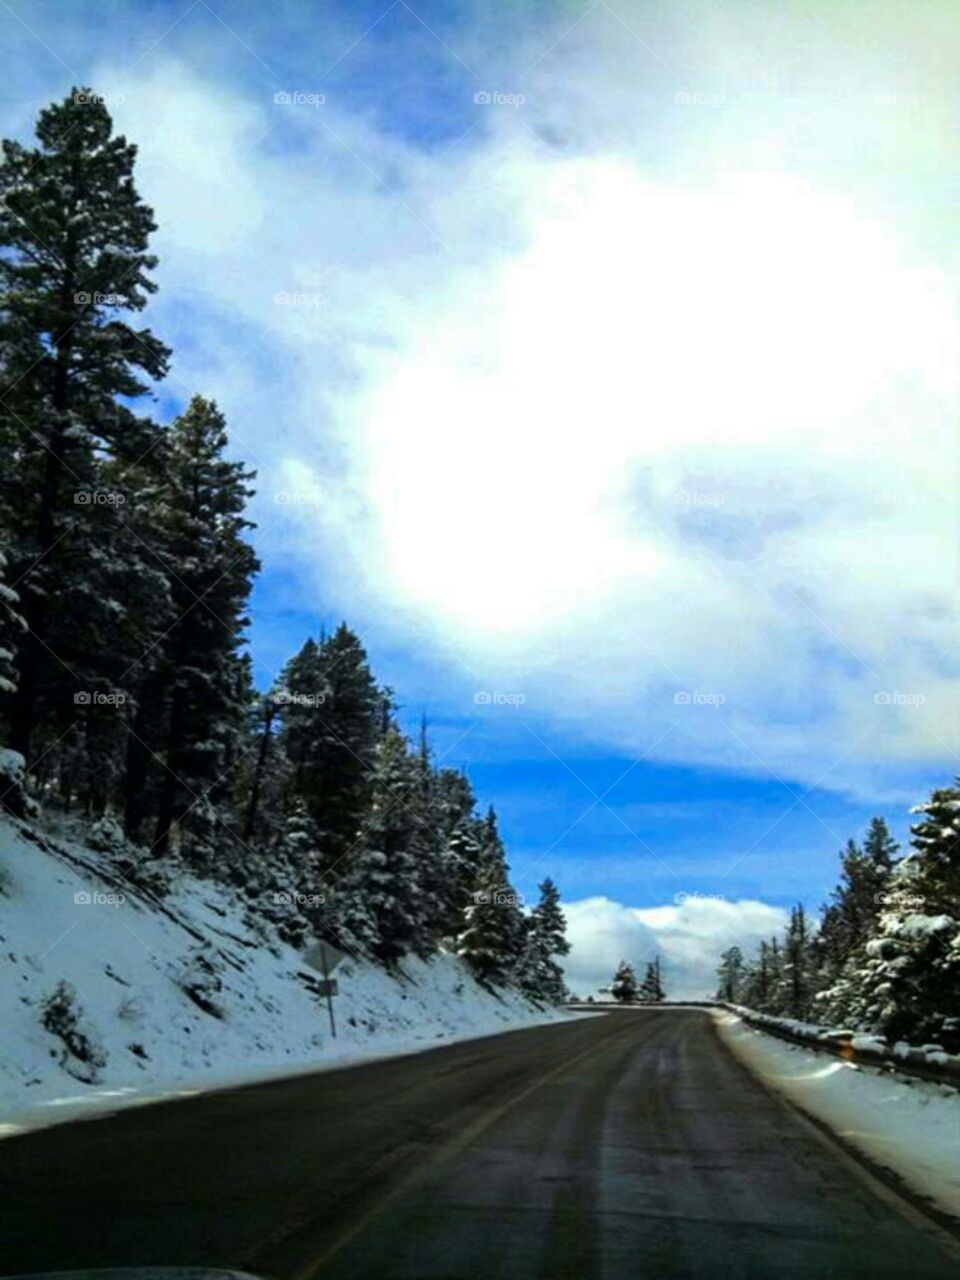 Snow in NM